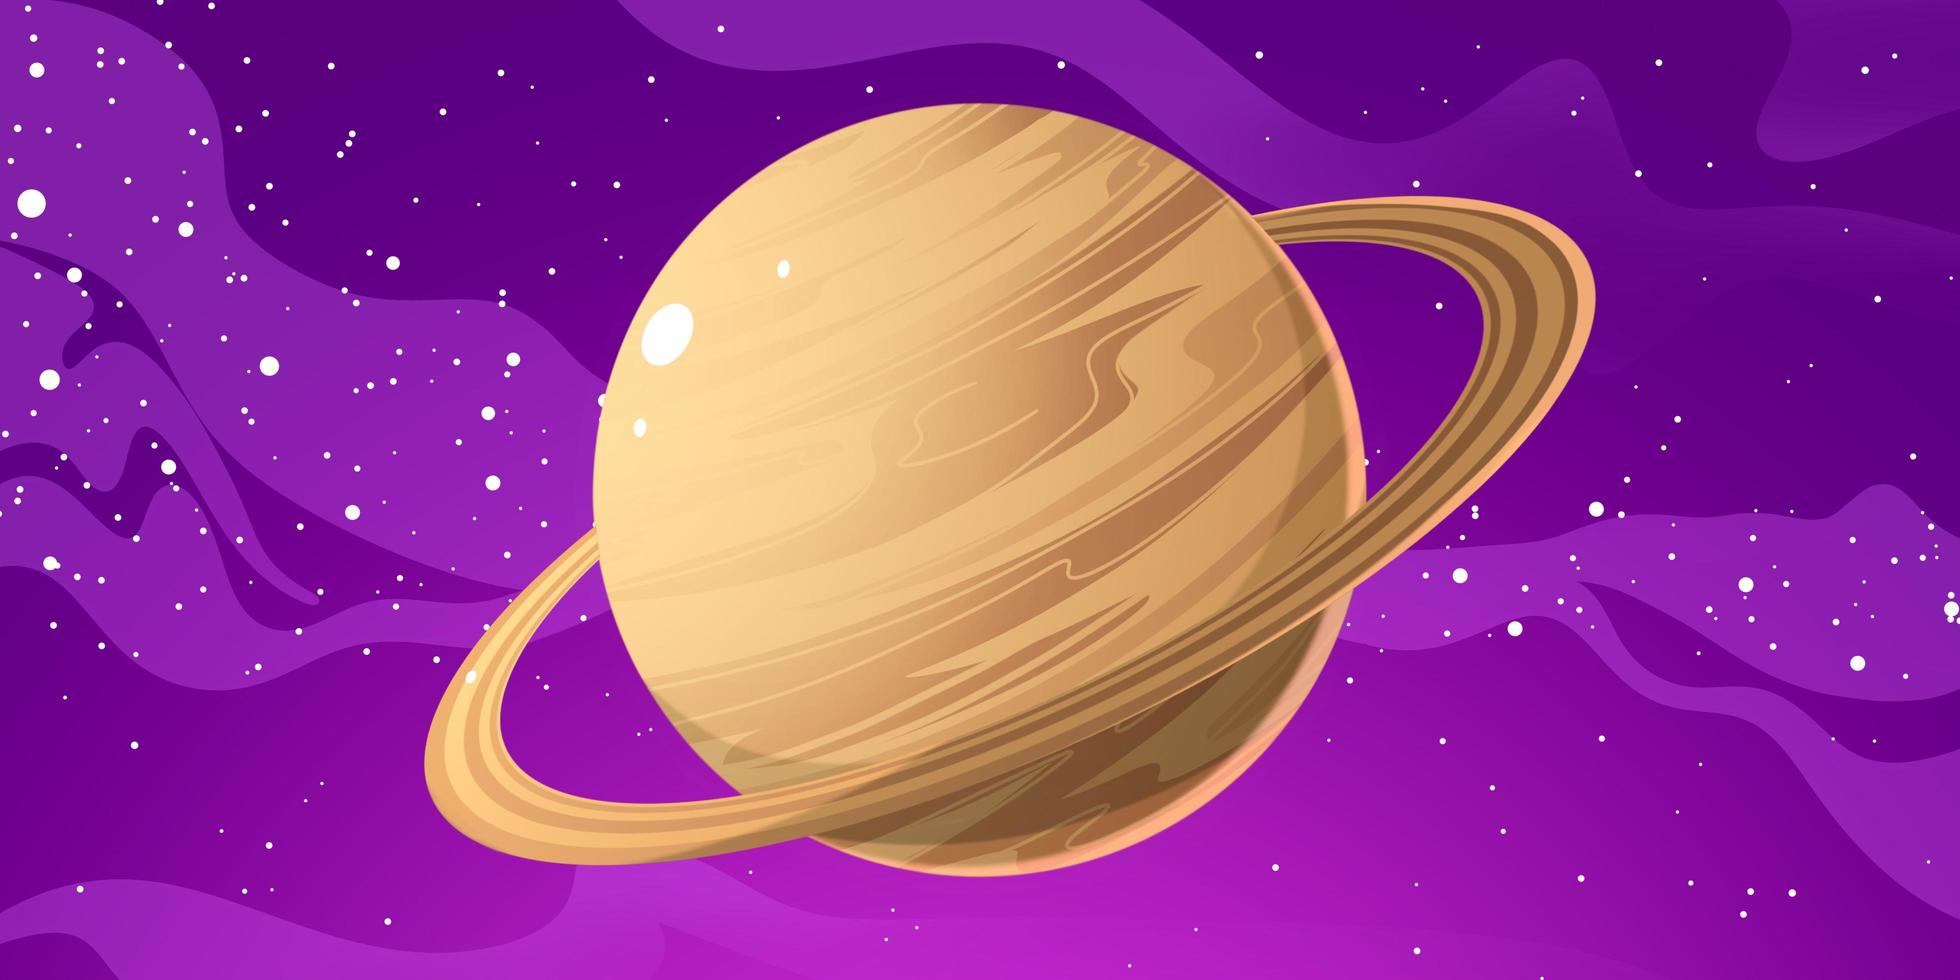 Saturn planet illustration. Saturn is the second largest planet after Jupiter in the solar system. Saturn has a magnificent ring so Saturn looks so beautiful photo